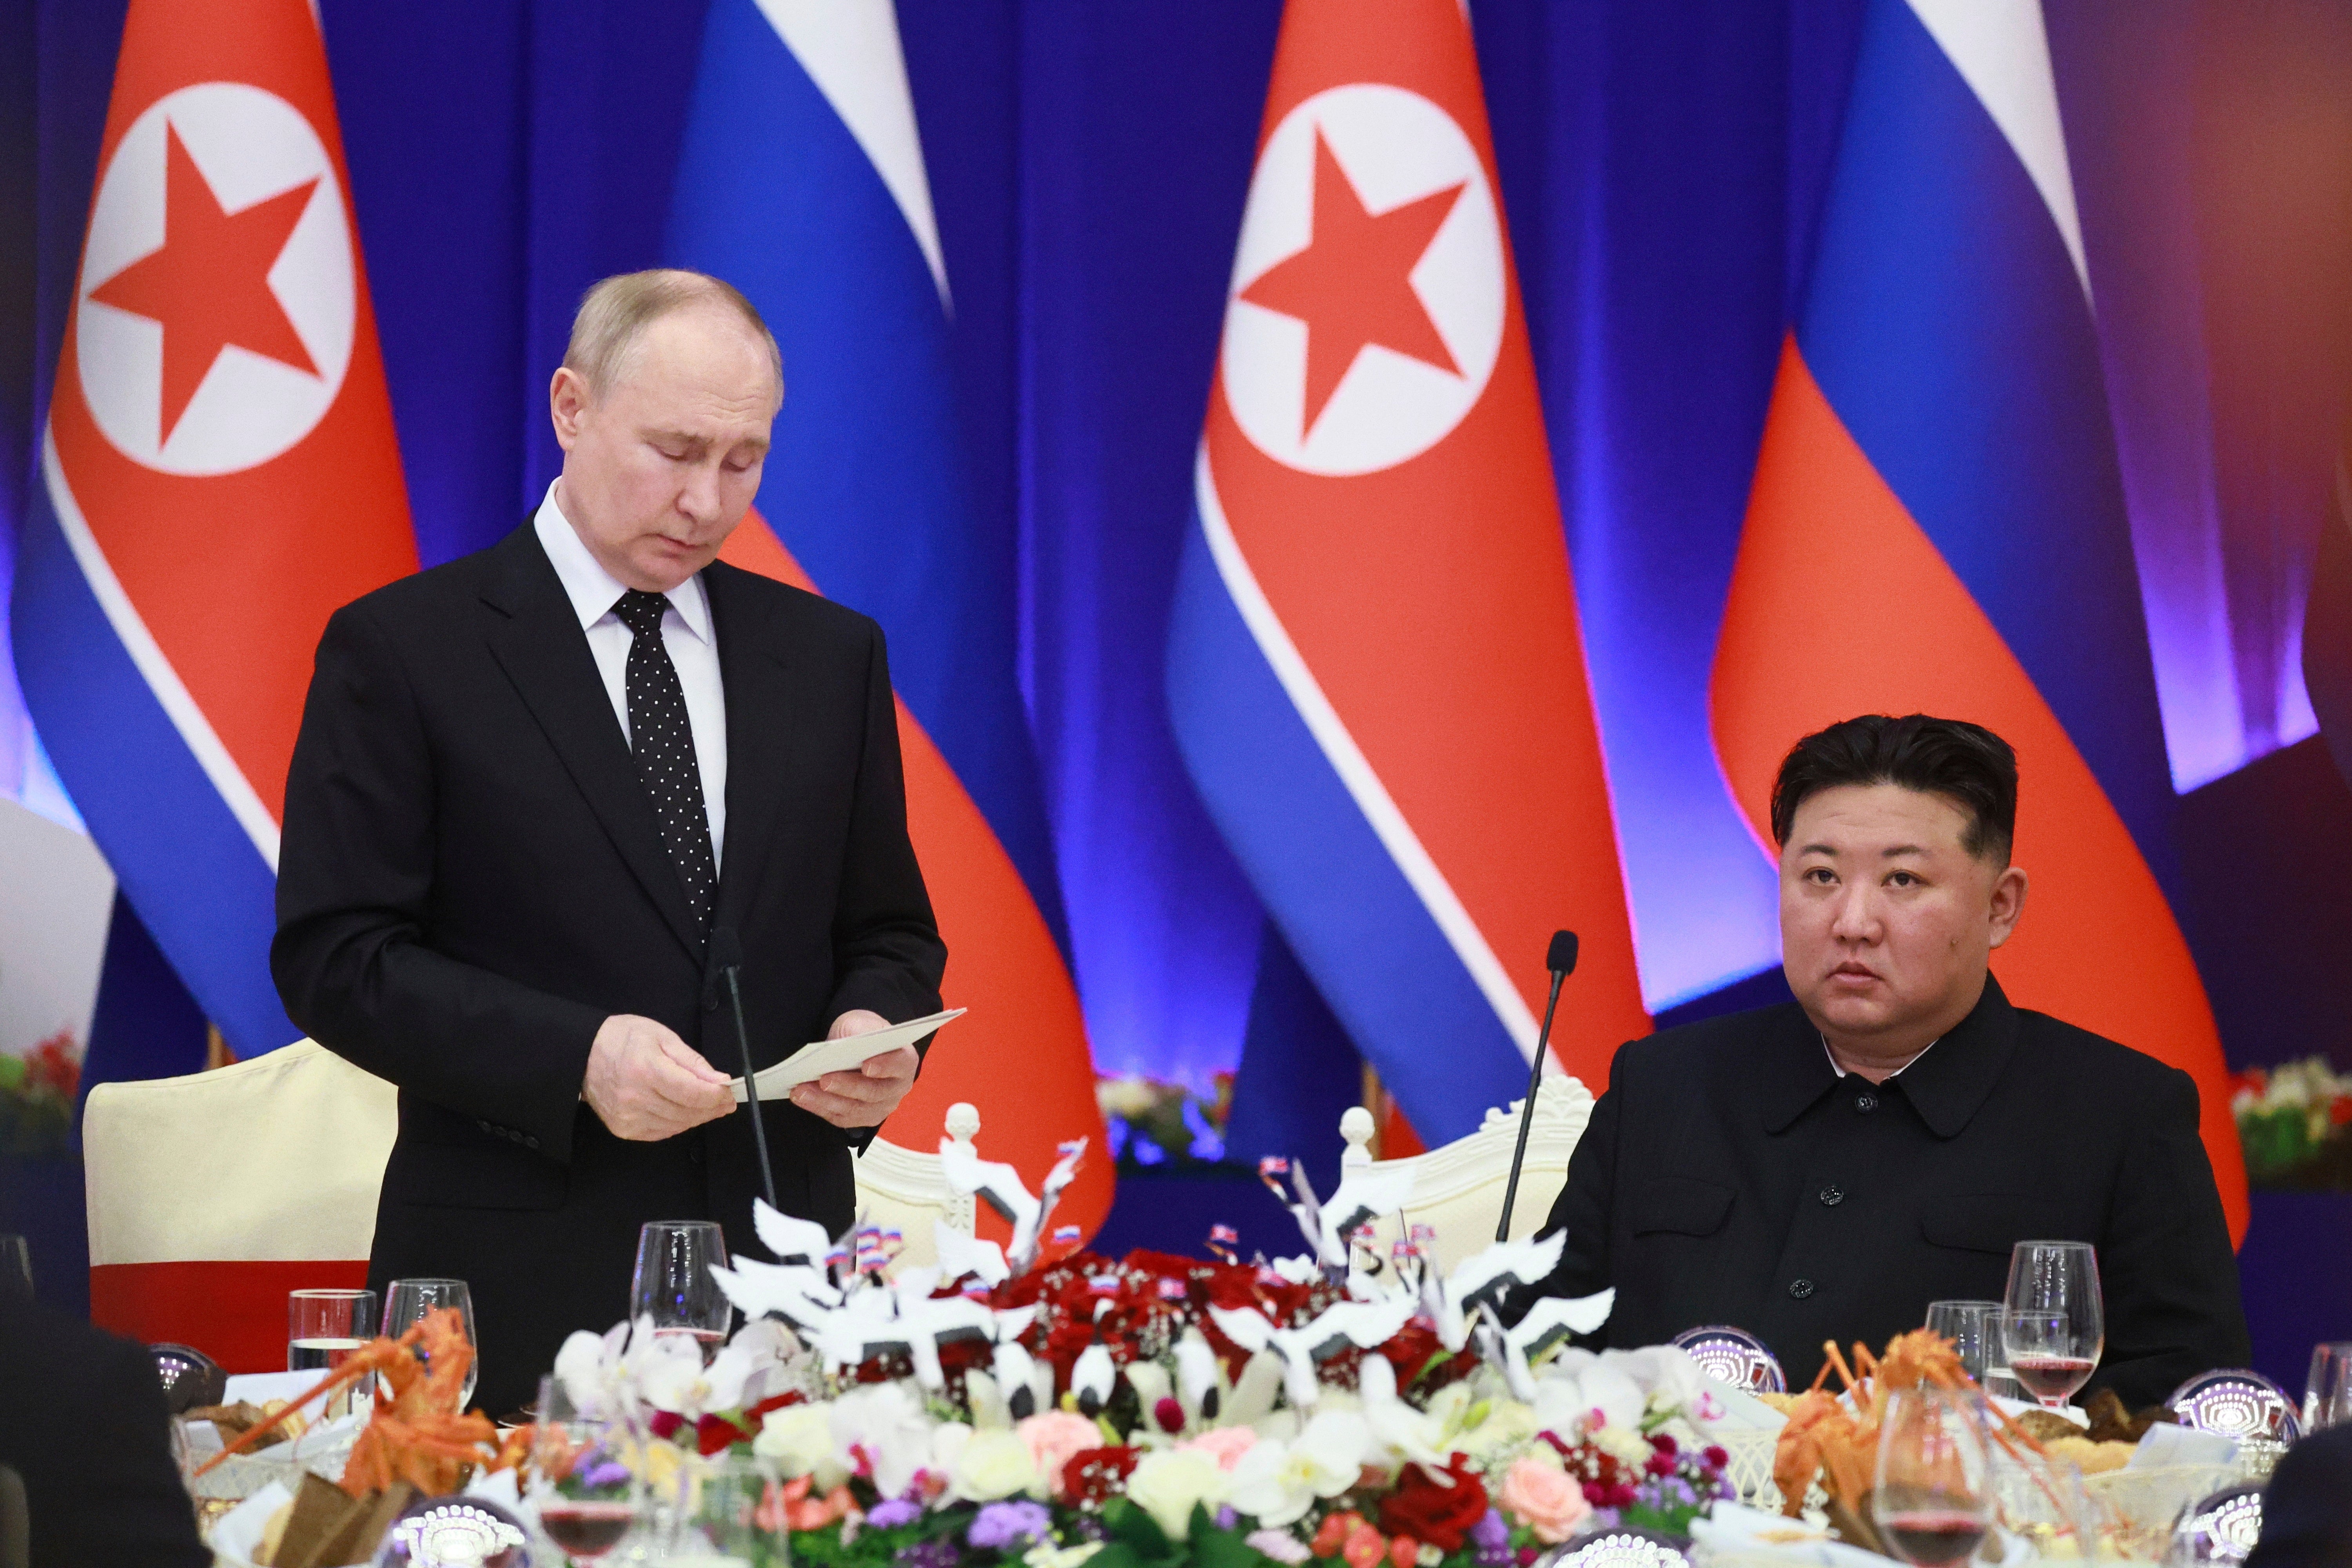 Putin, left, speaks as Kim listens to him during a state reception after their talks in Pyongyang, North Korea, on Wednesday